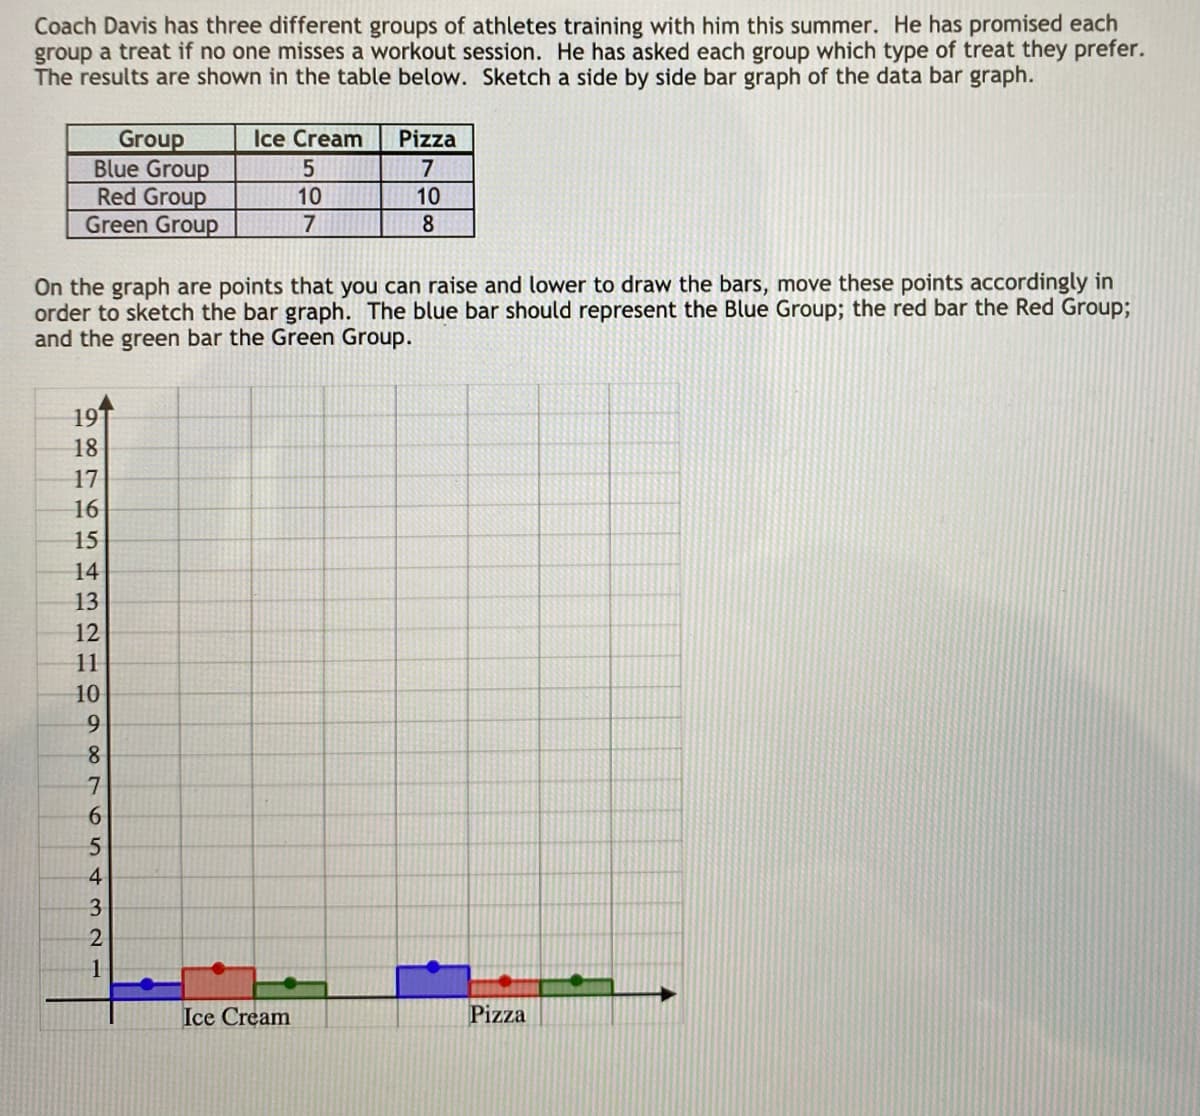 Coach Davis has three different groups of athletes training with him this summer. He has promised each
group a treat if no one misses a workout session. He has asked each group which type of treat they prefer.
The results are shown in the table below. Sketch a side by side bar graph of the data bar graph.
Group
Blue Group
Red Group
Green Group
19
18
17
16
15
14
13
12
11
10
On the graph are points that you can raise and lower to draw the bars, move these points accordingly in
order to sketch the bar graph. The blue bar should represent the Blue Group; the red bar the Red Group;
and the green bar the Green Group.
9
8
7
6
654321
4
2
Ice Cream
5
10
7
1
Pizza
7
10
8
Ice Cream
Pizza